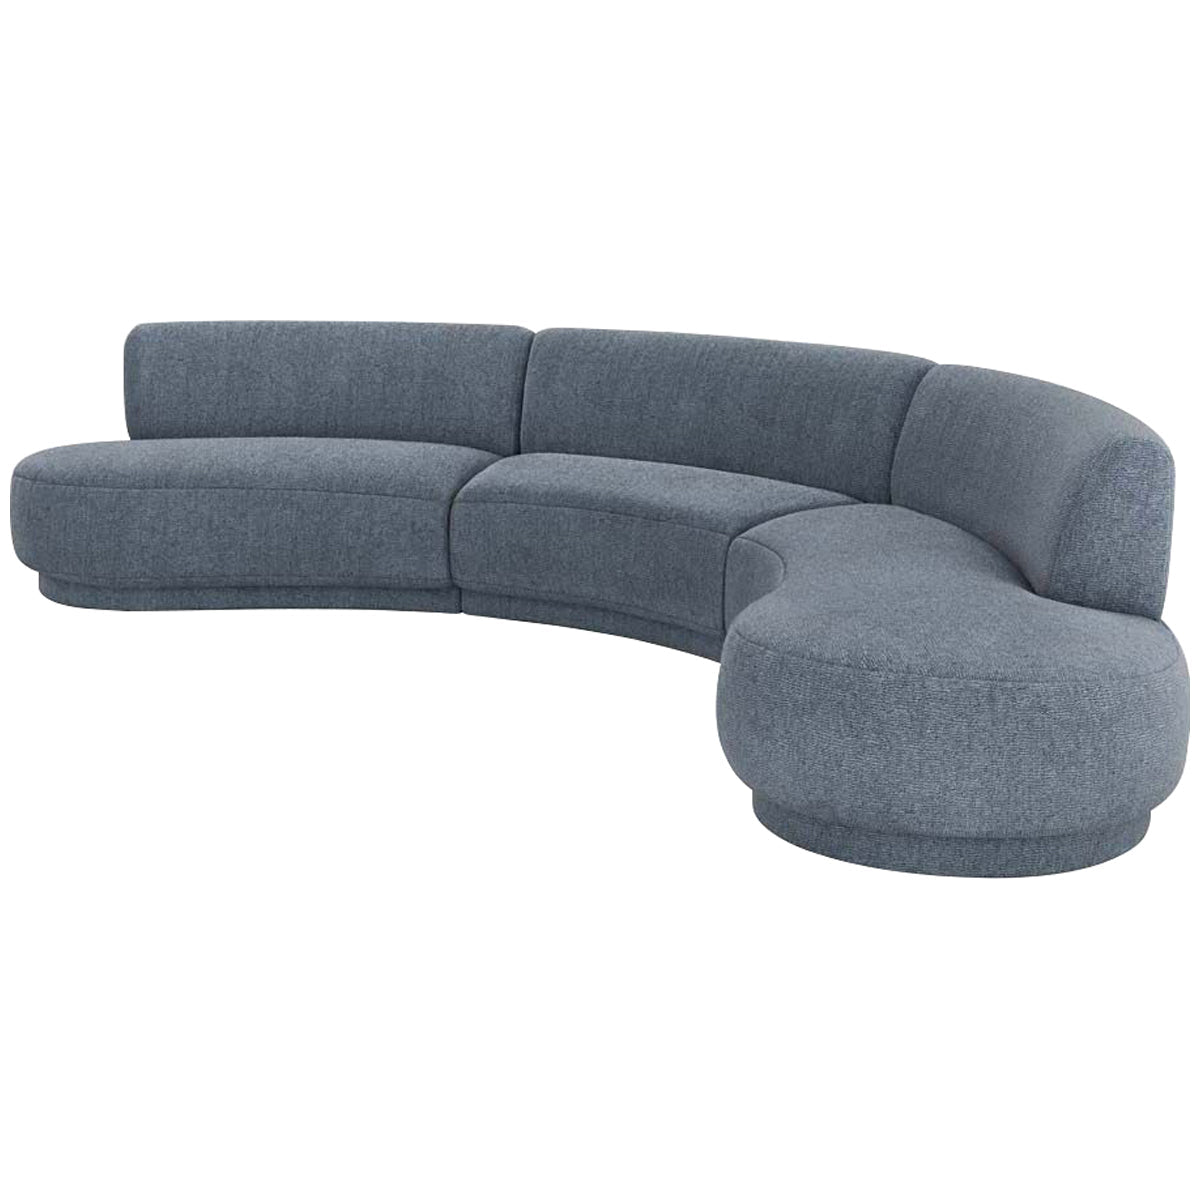 Interlude Home Nuage Sectional - Azure